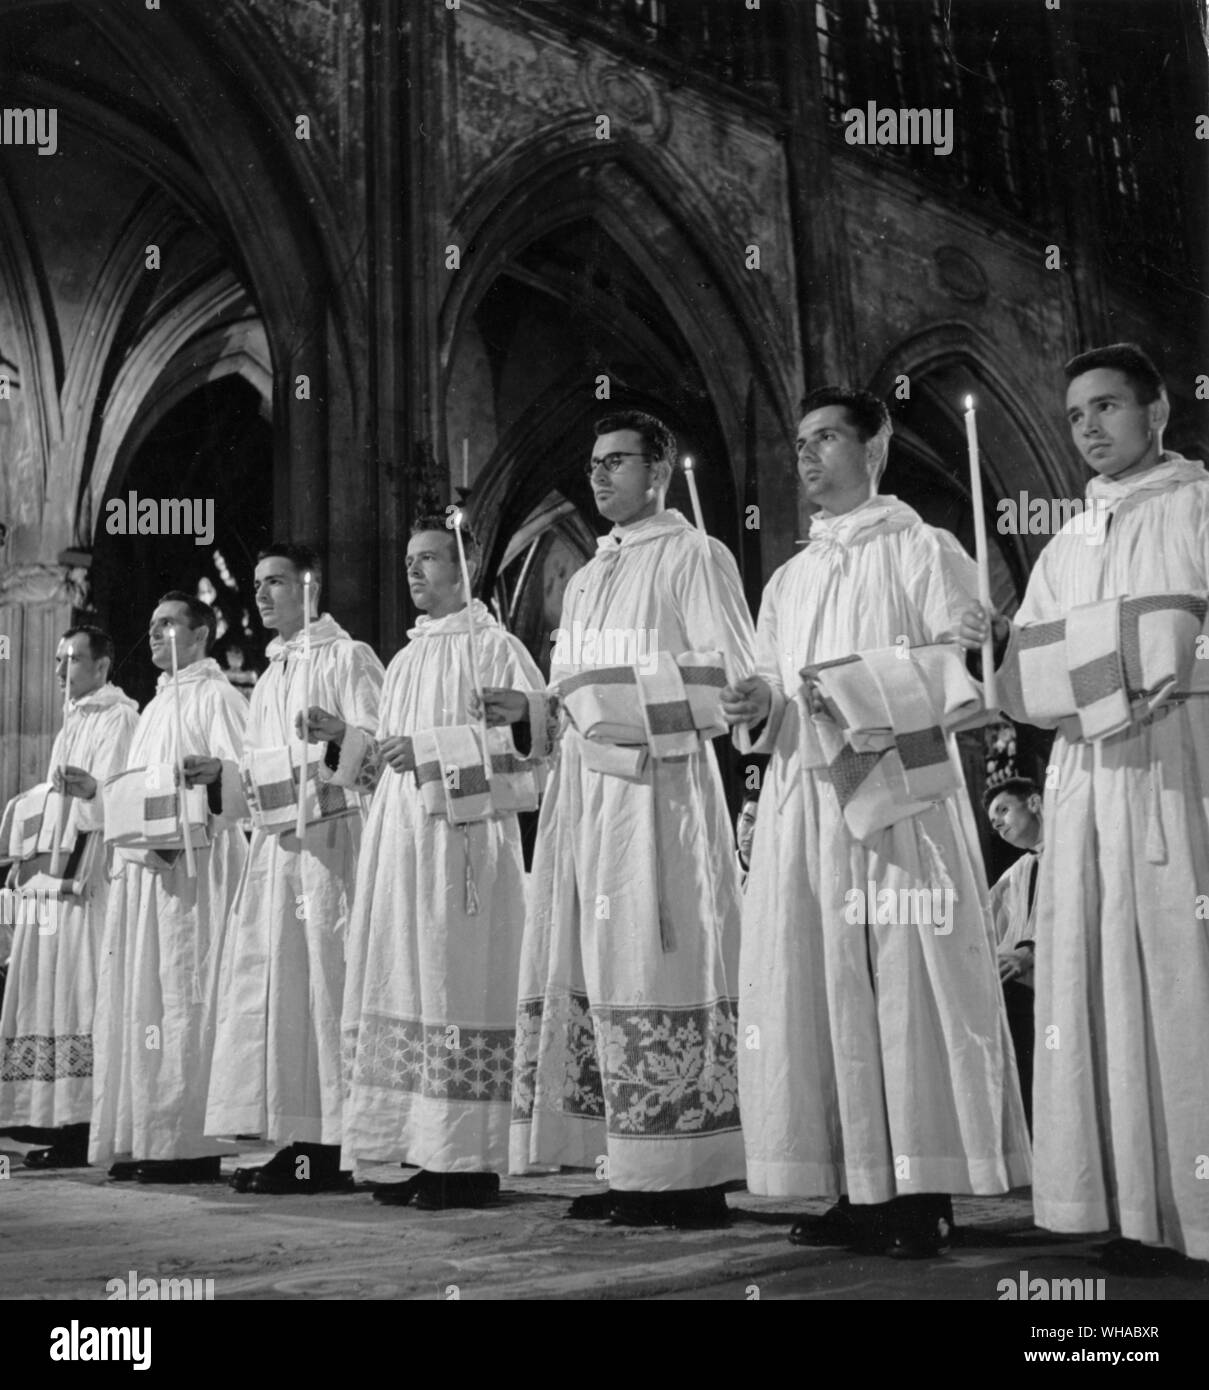 At the beginning of the rite of ordination to the priesthood, the candidate lie prostrate while the Litany of the Saints is sung. Stock Photo